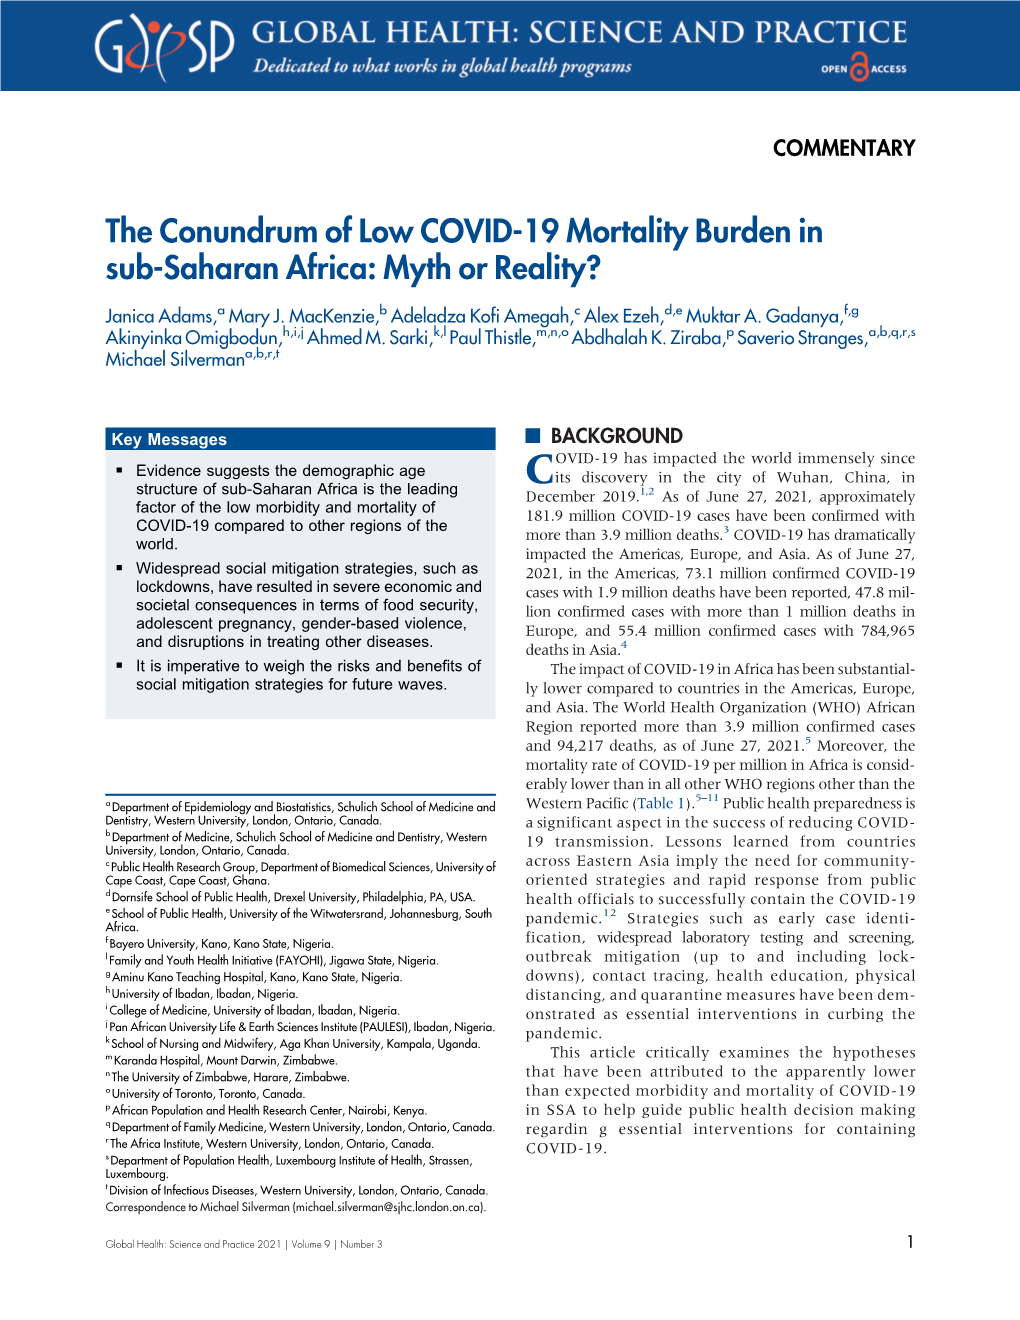 The Conundrum of Low COVID-19 Mortality Burden in Sub-Saharan Africa: Myth Or Reality?